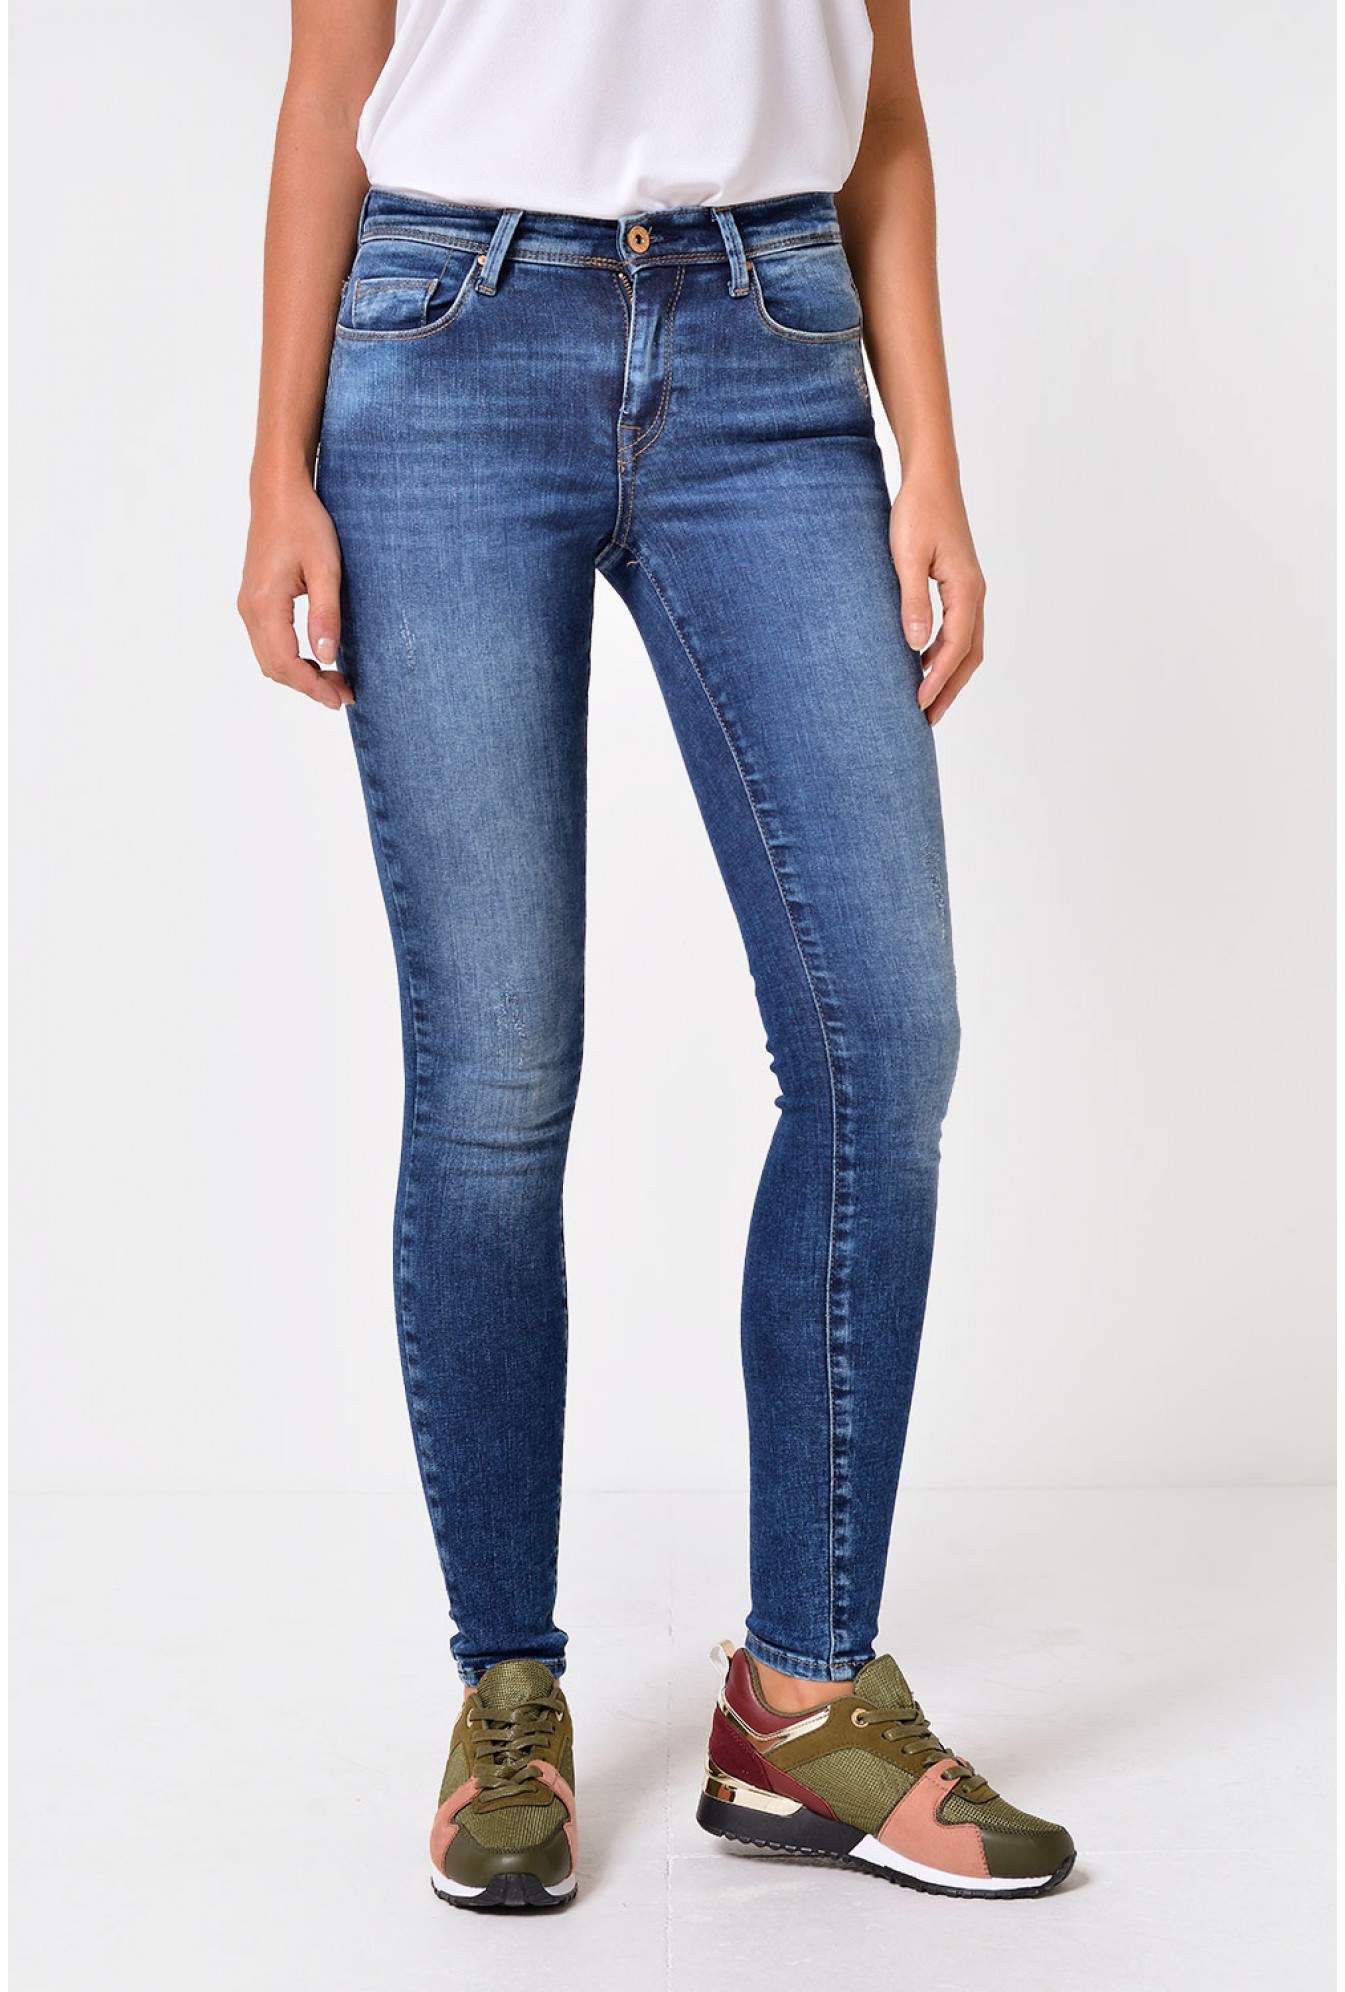 most flattering jeans for big thighs